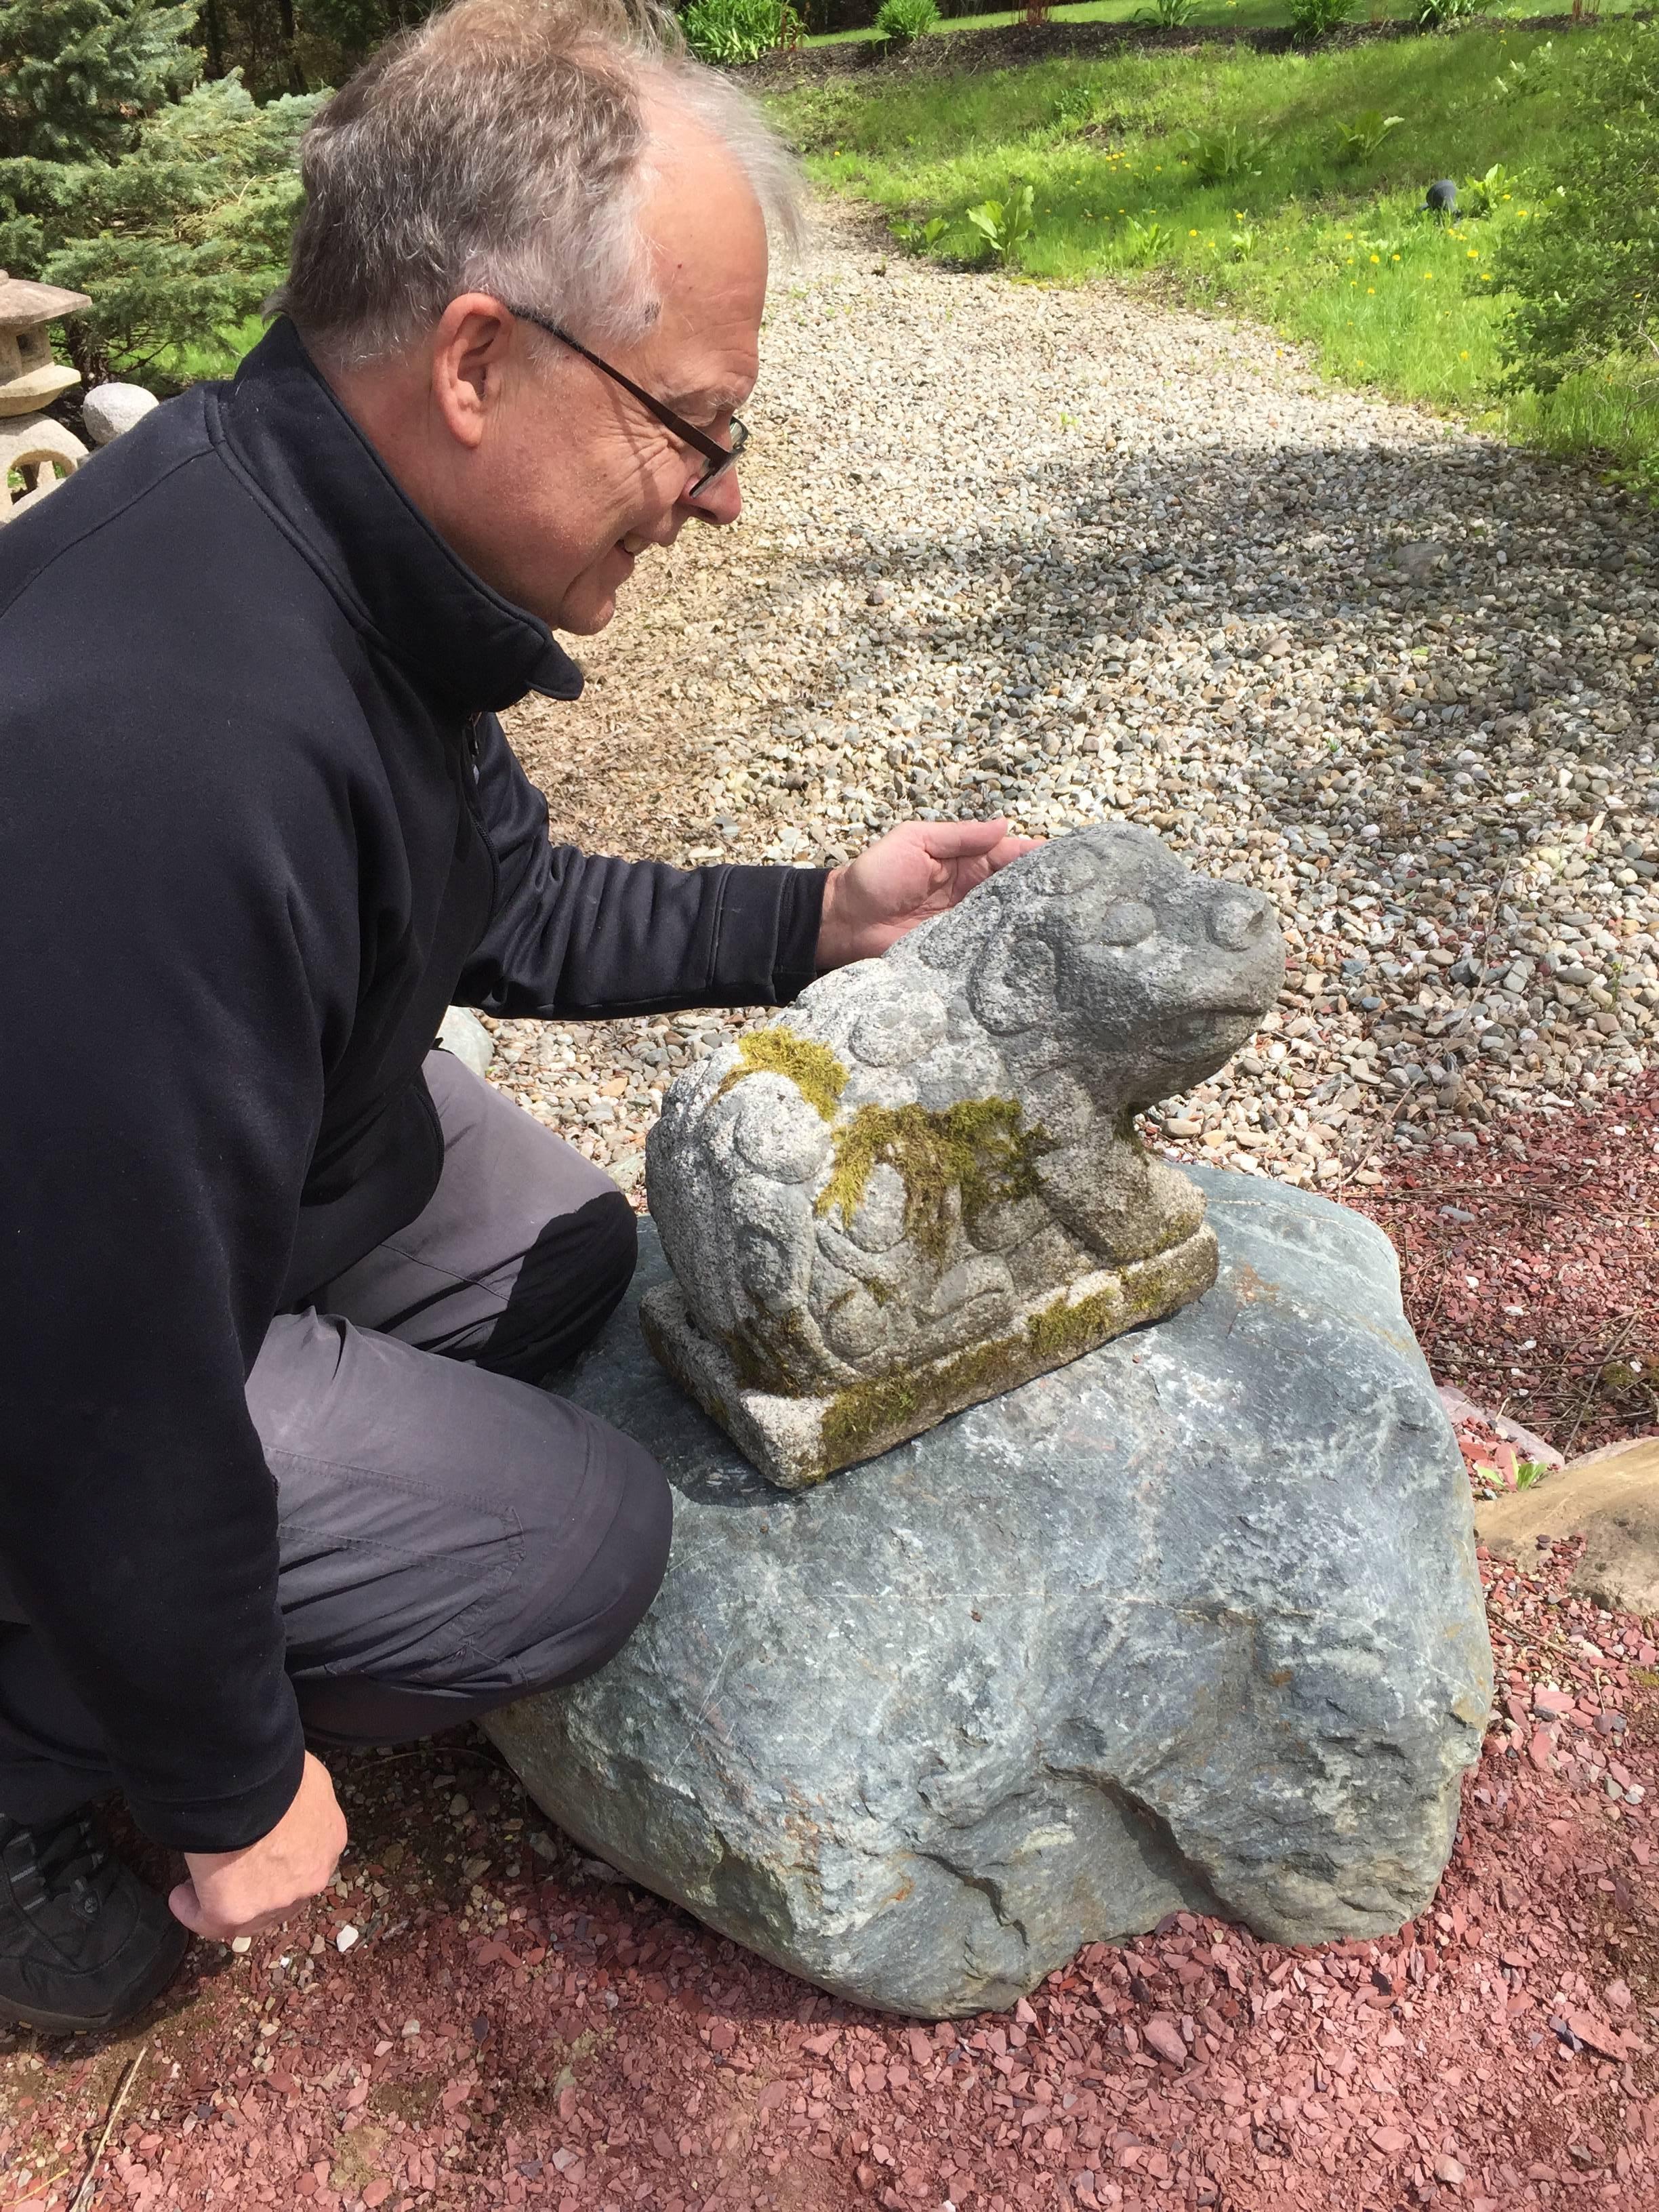 Here's one of the only hand-carved antique granite stone tigers we have had the pleasure of owning- a superb garden treasure from Korea, dates to the late 19th century or early 20th century. 

This is a finely crafted hand-carved effigy of a